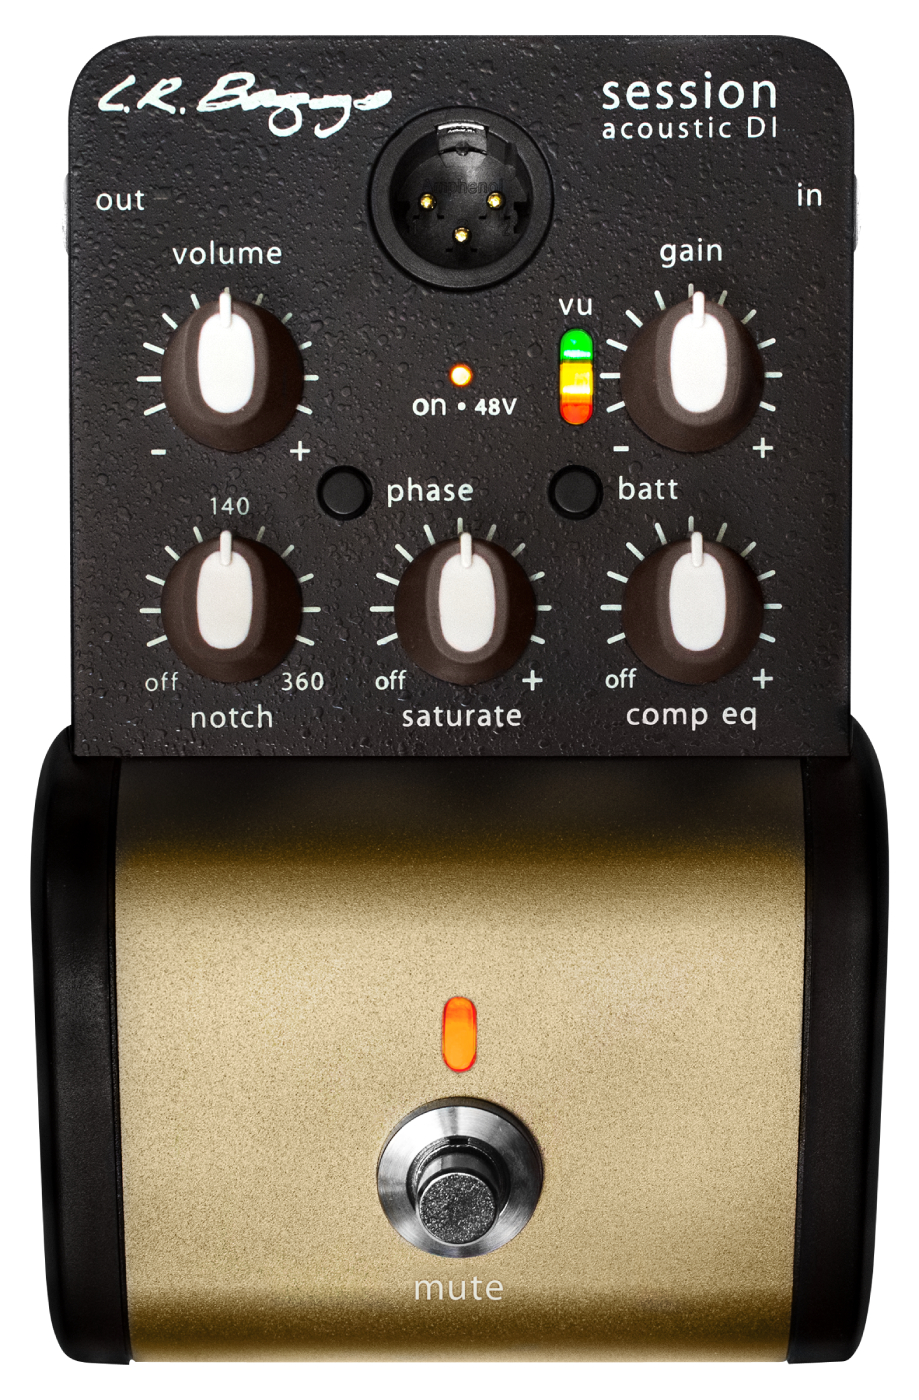 Lr Baggs Align Session Di - Acoustic preamp - Variation 1